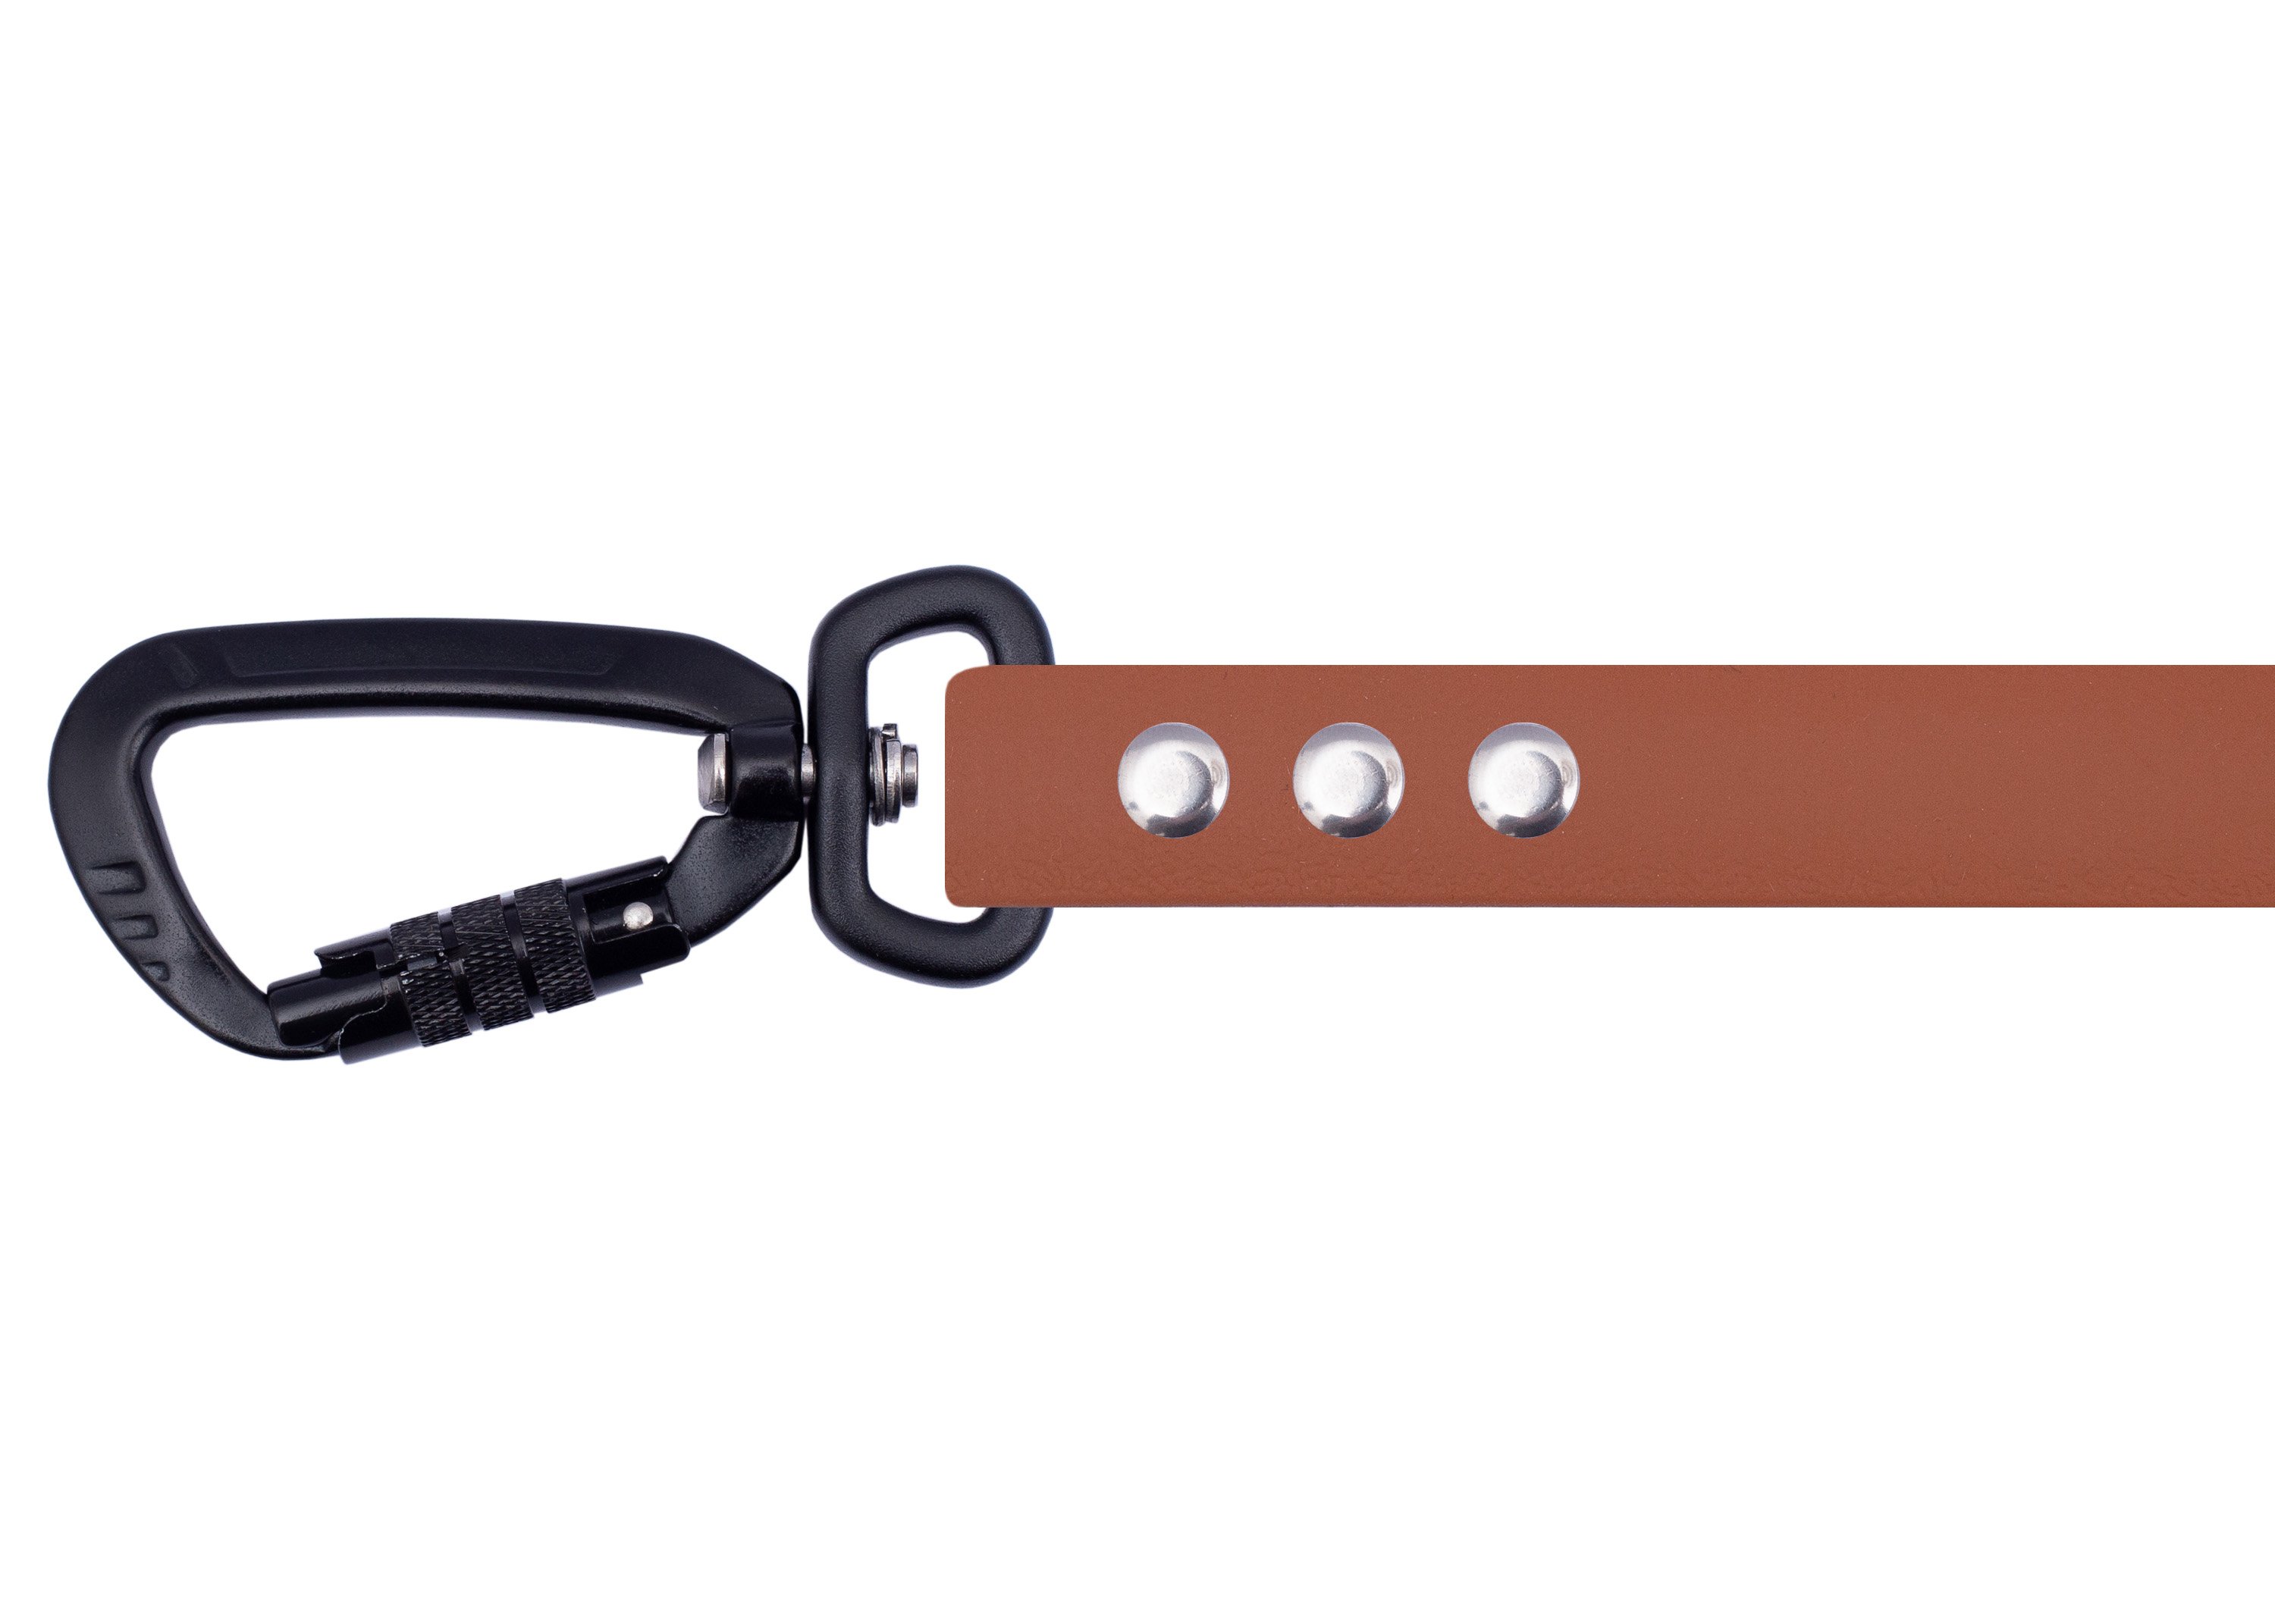 Tow leash with safety carabiner Cognac black 15m with wrist strap 